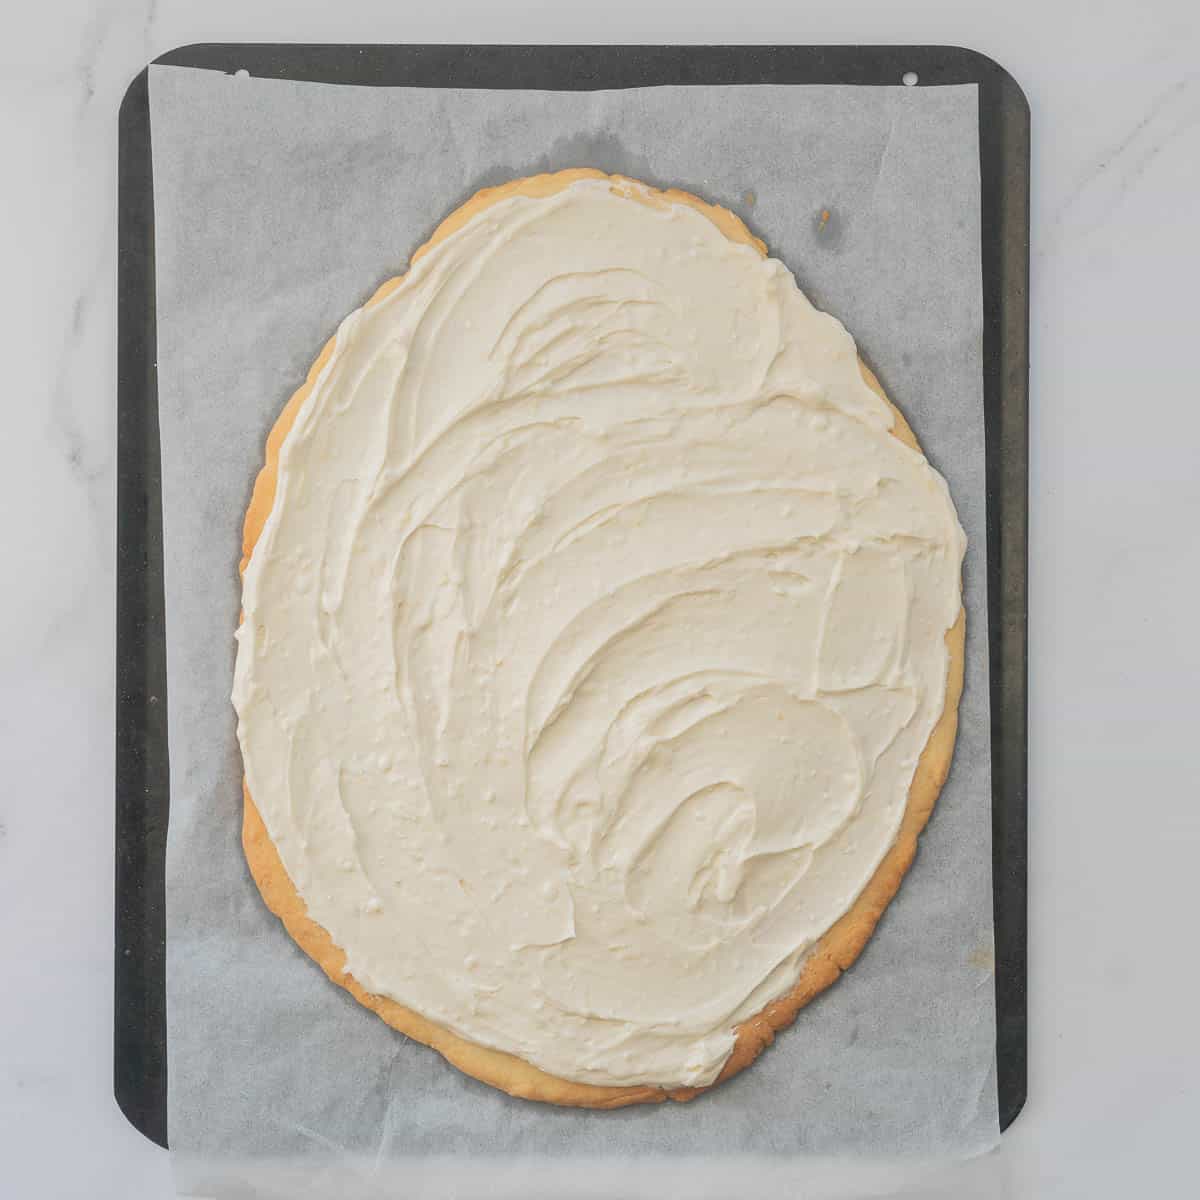 Cream cheese frosting spread over a large egg shaped pizza base sized cookie. 